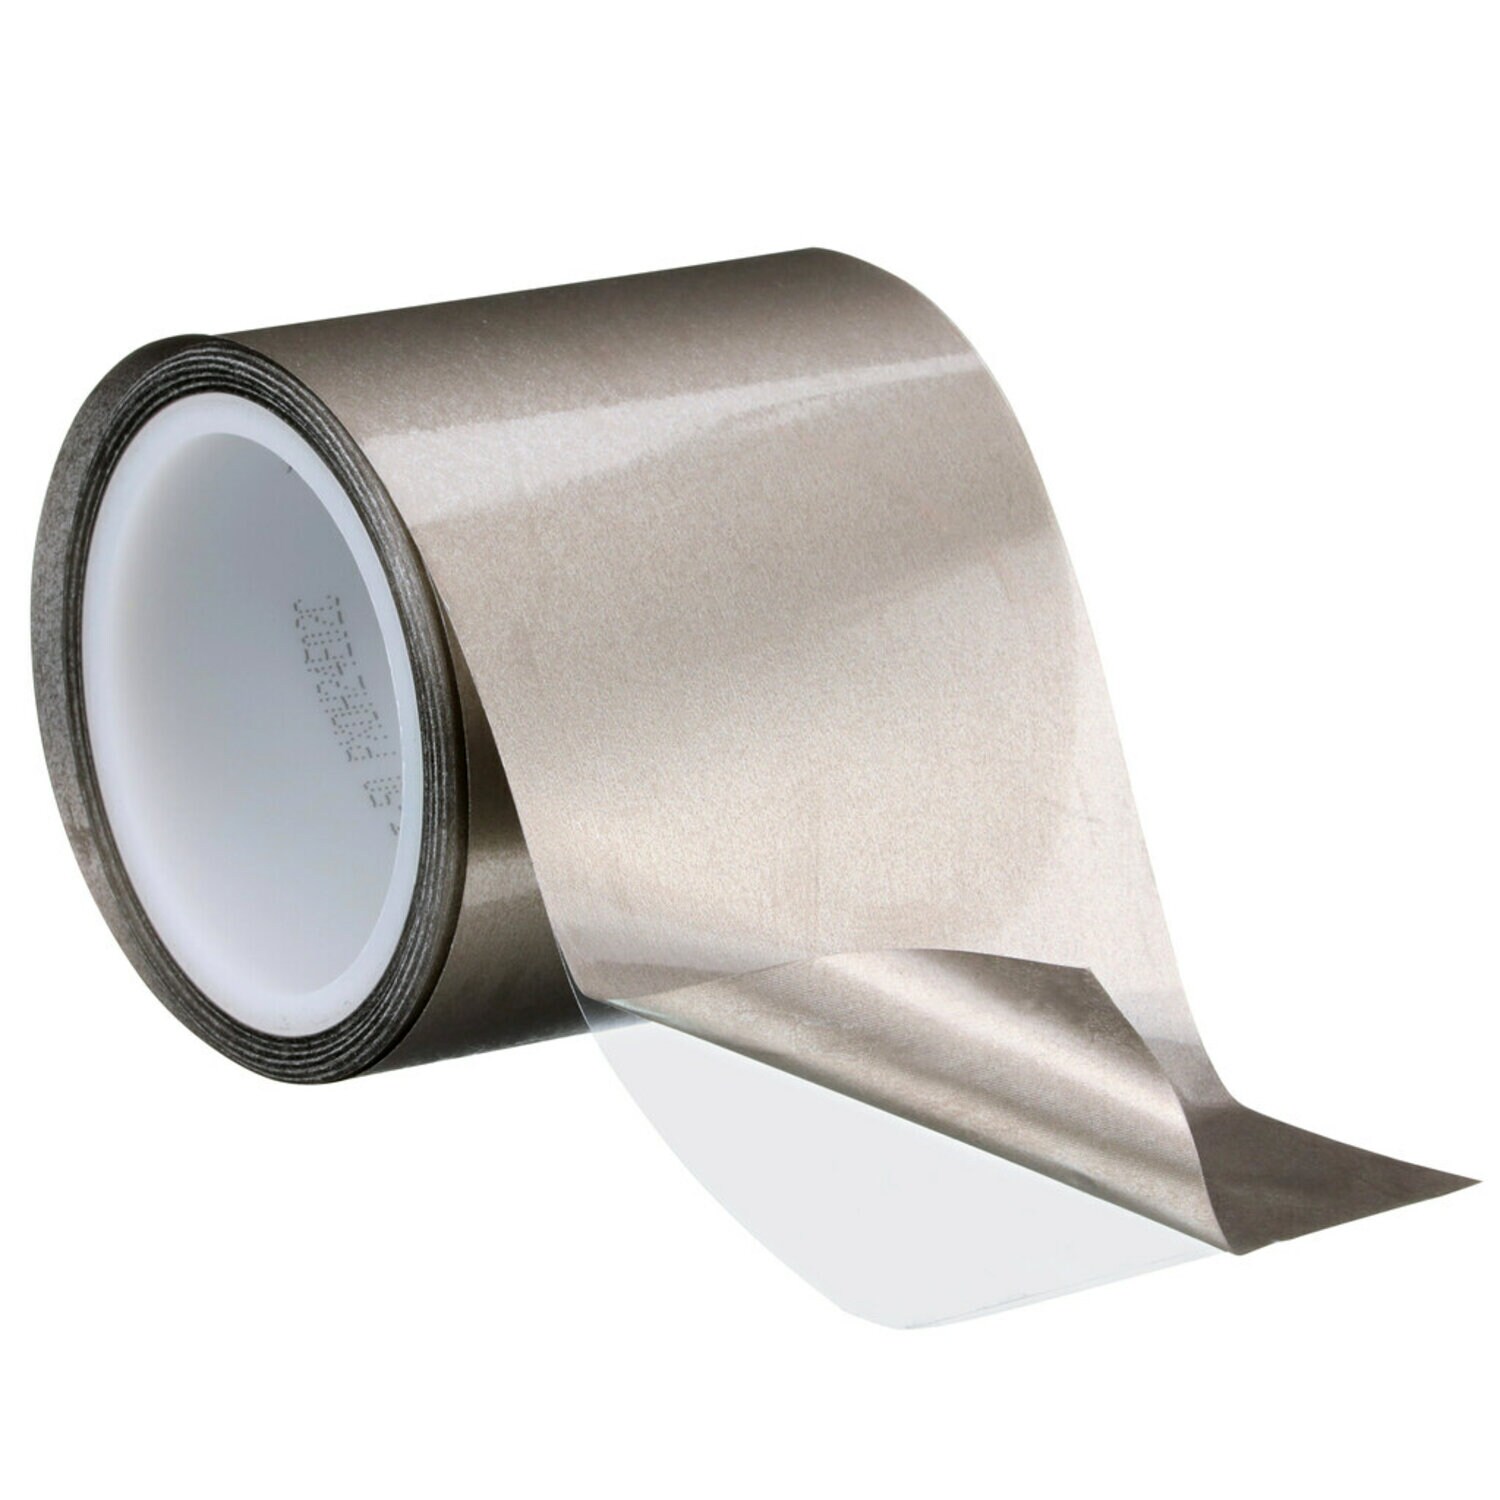 7100313599 - 3M Electrically Conductive Double-Sided Tape 5113DFT-50, Grey, 25 mm x 10 m, 12 Rolls/Case, Sample